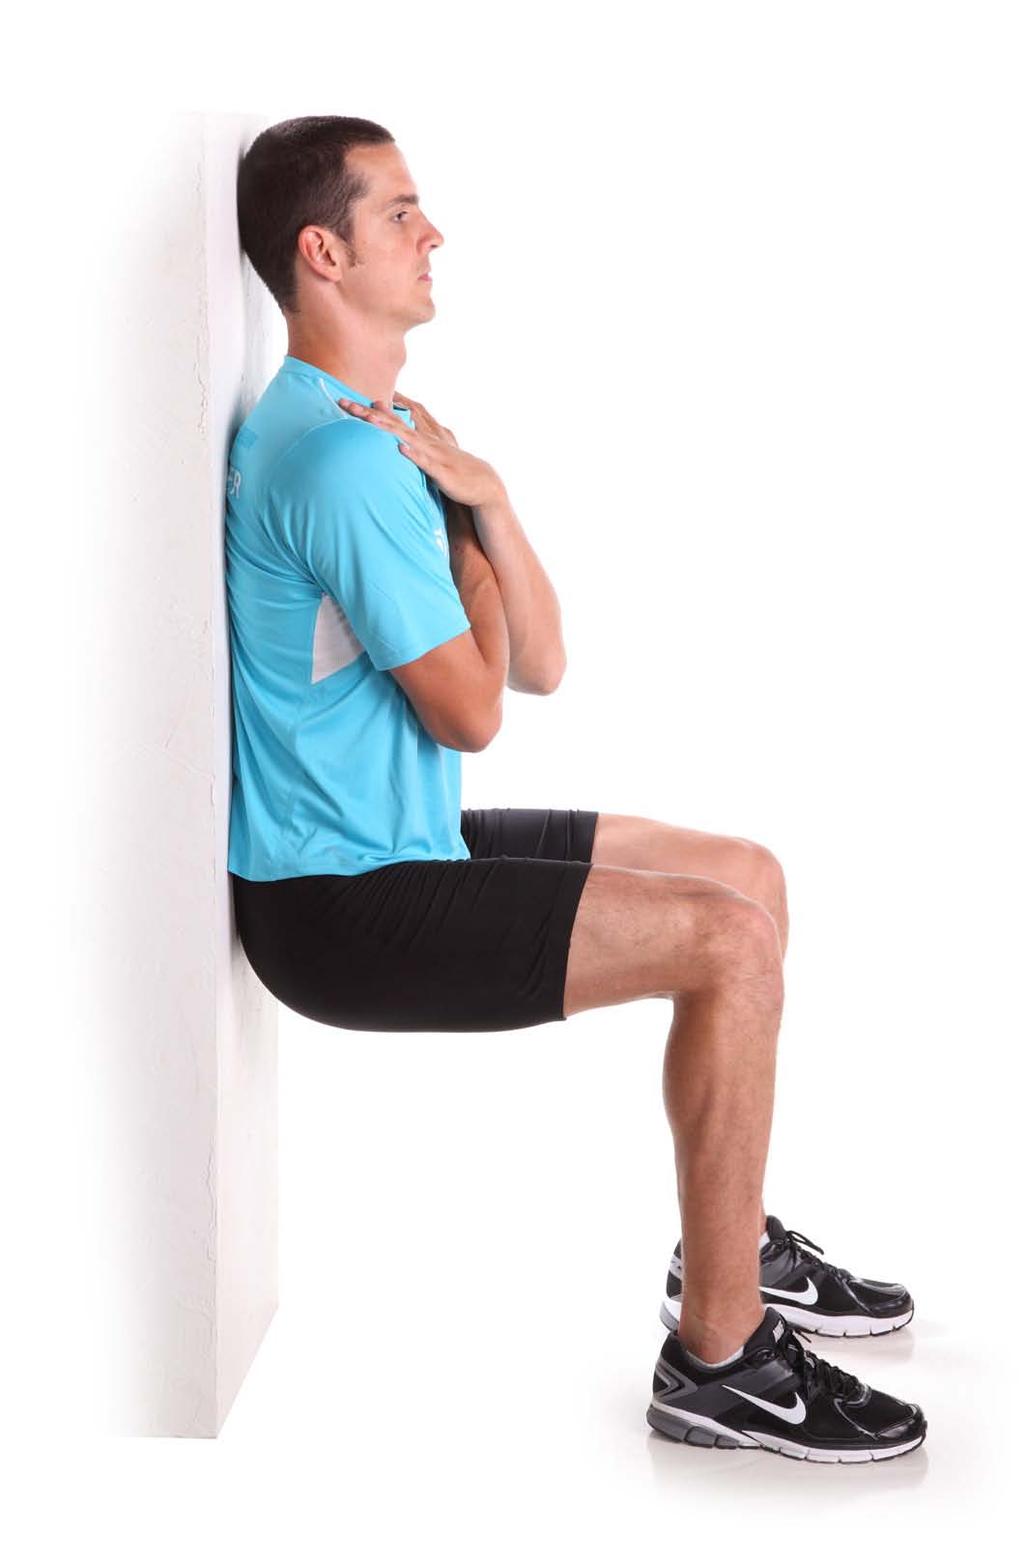 Keep your weight on your heels and your back pressed into the wall for support. Slowly bend your knees and lower your body so that your thighs are parallel to the floor.